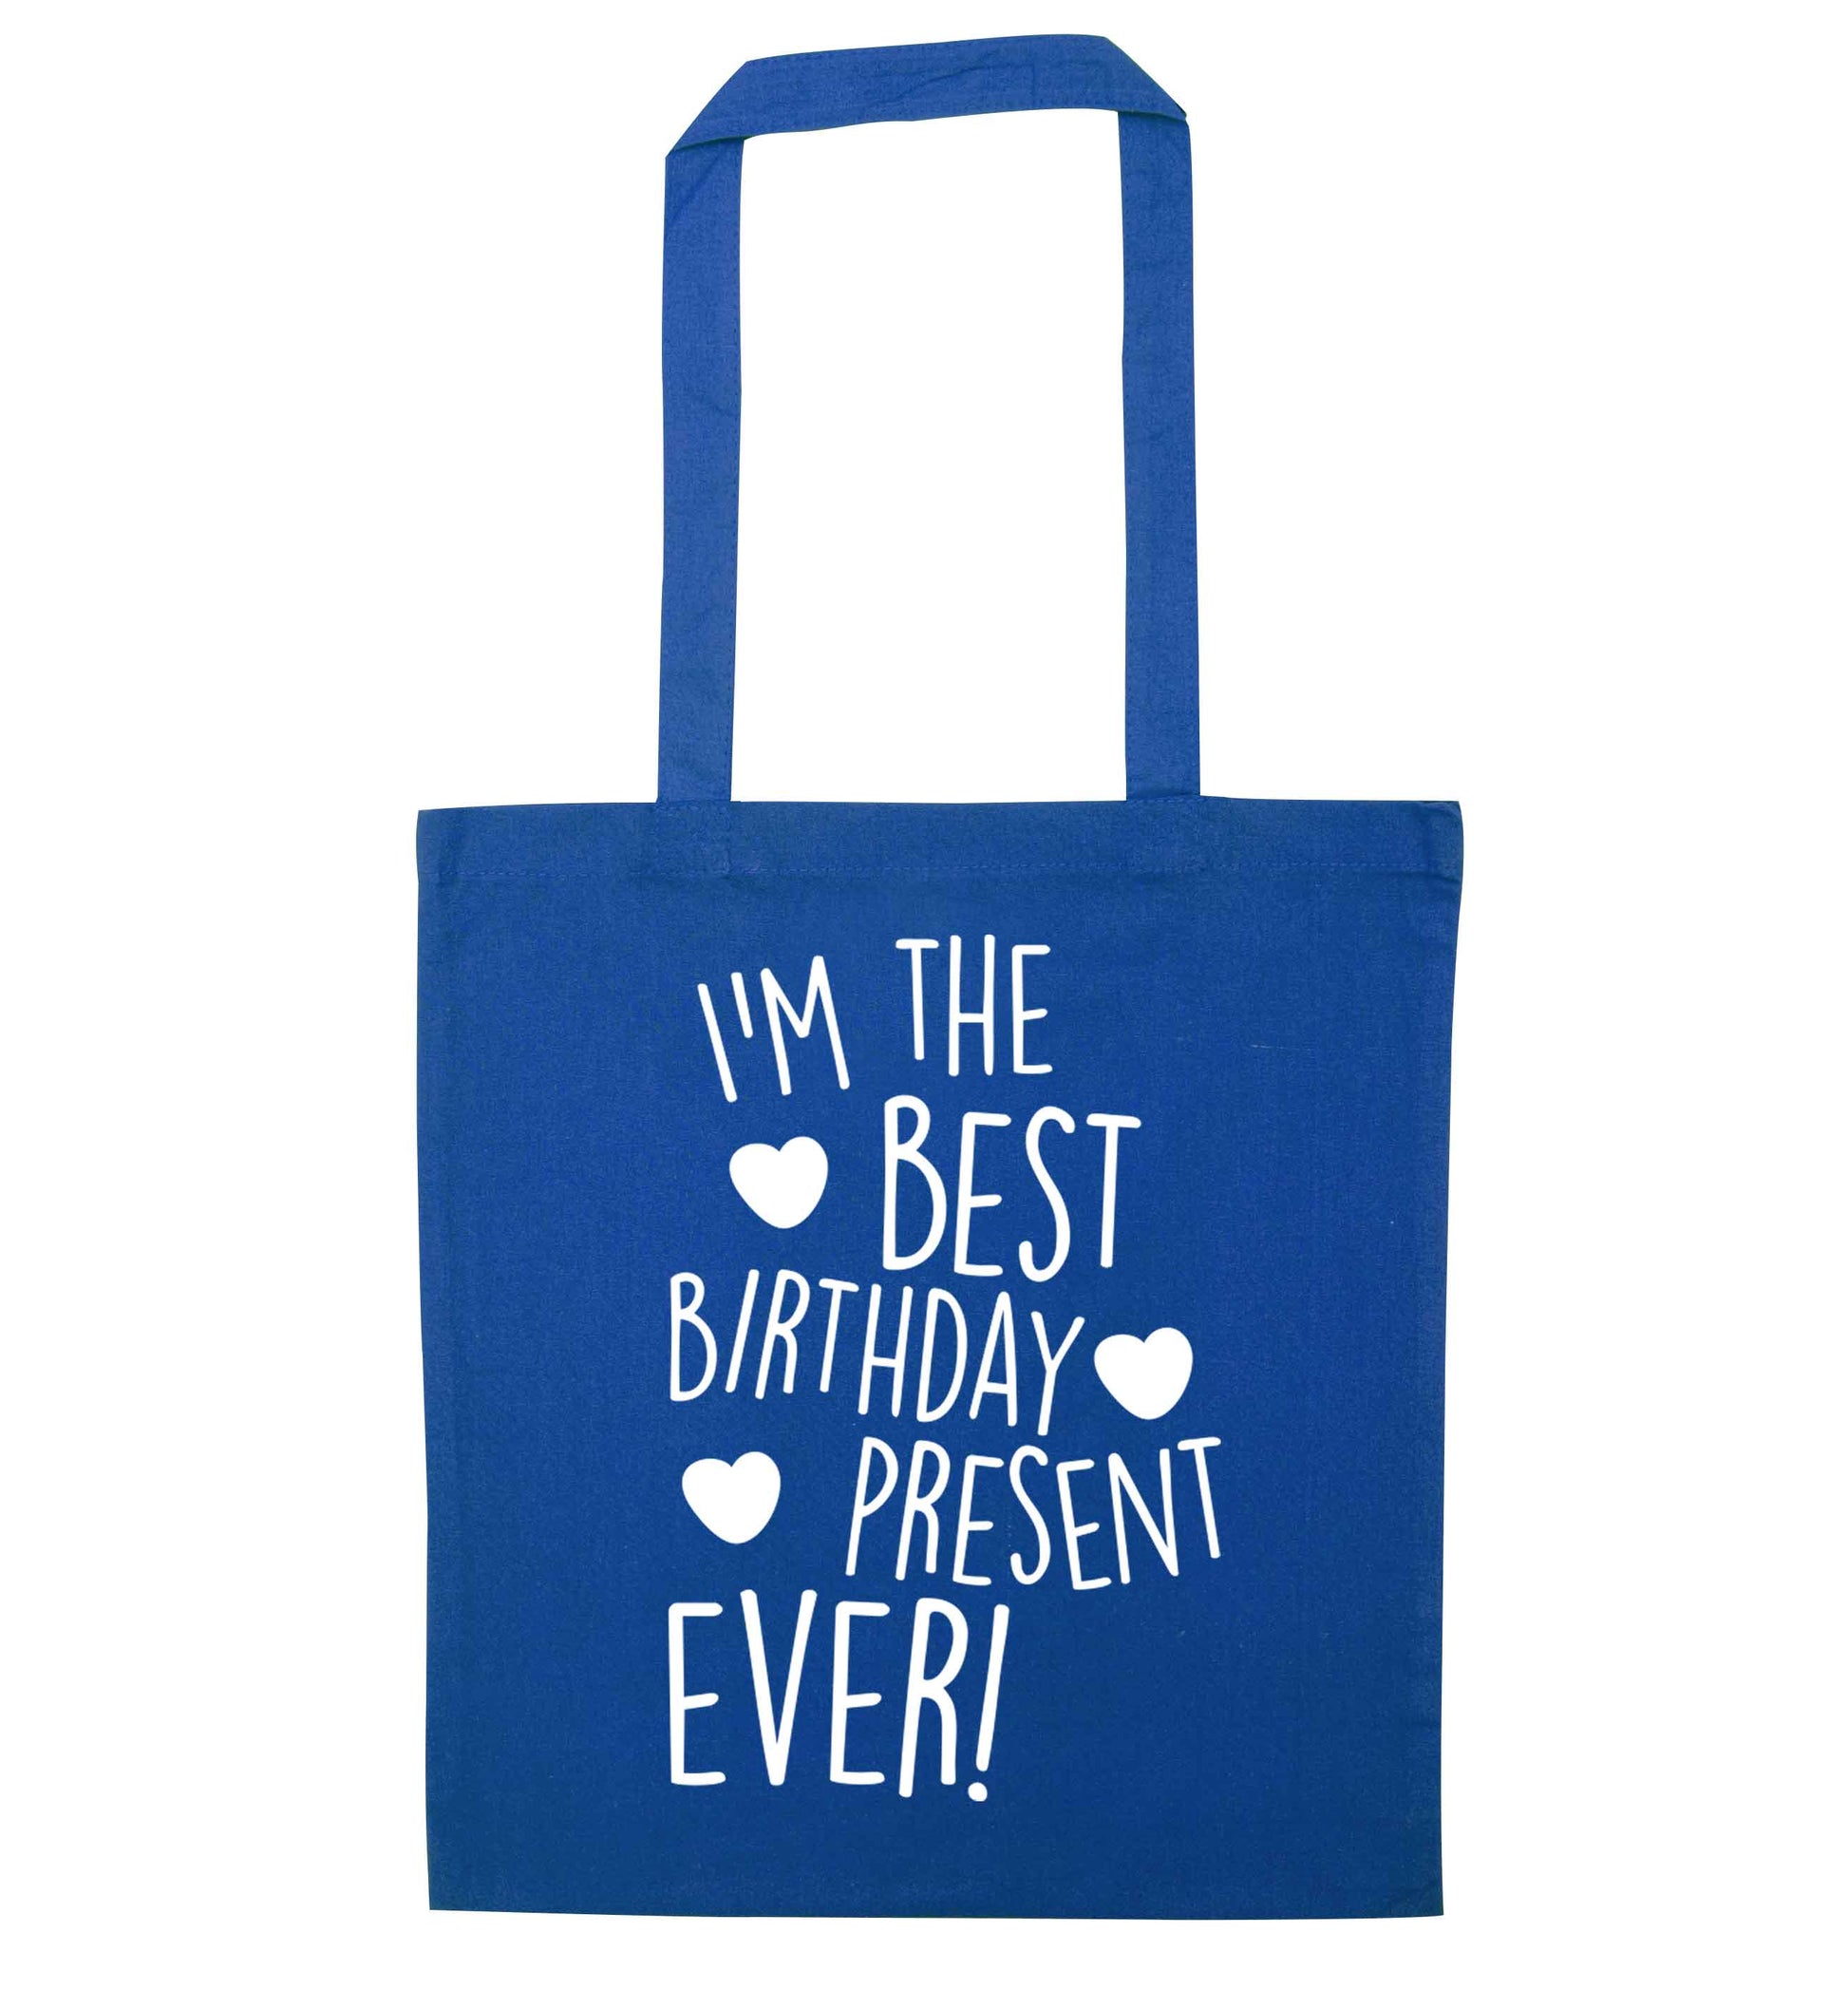 I'm the best birthday present ever blue tote bag